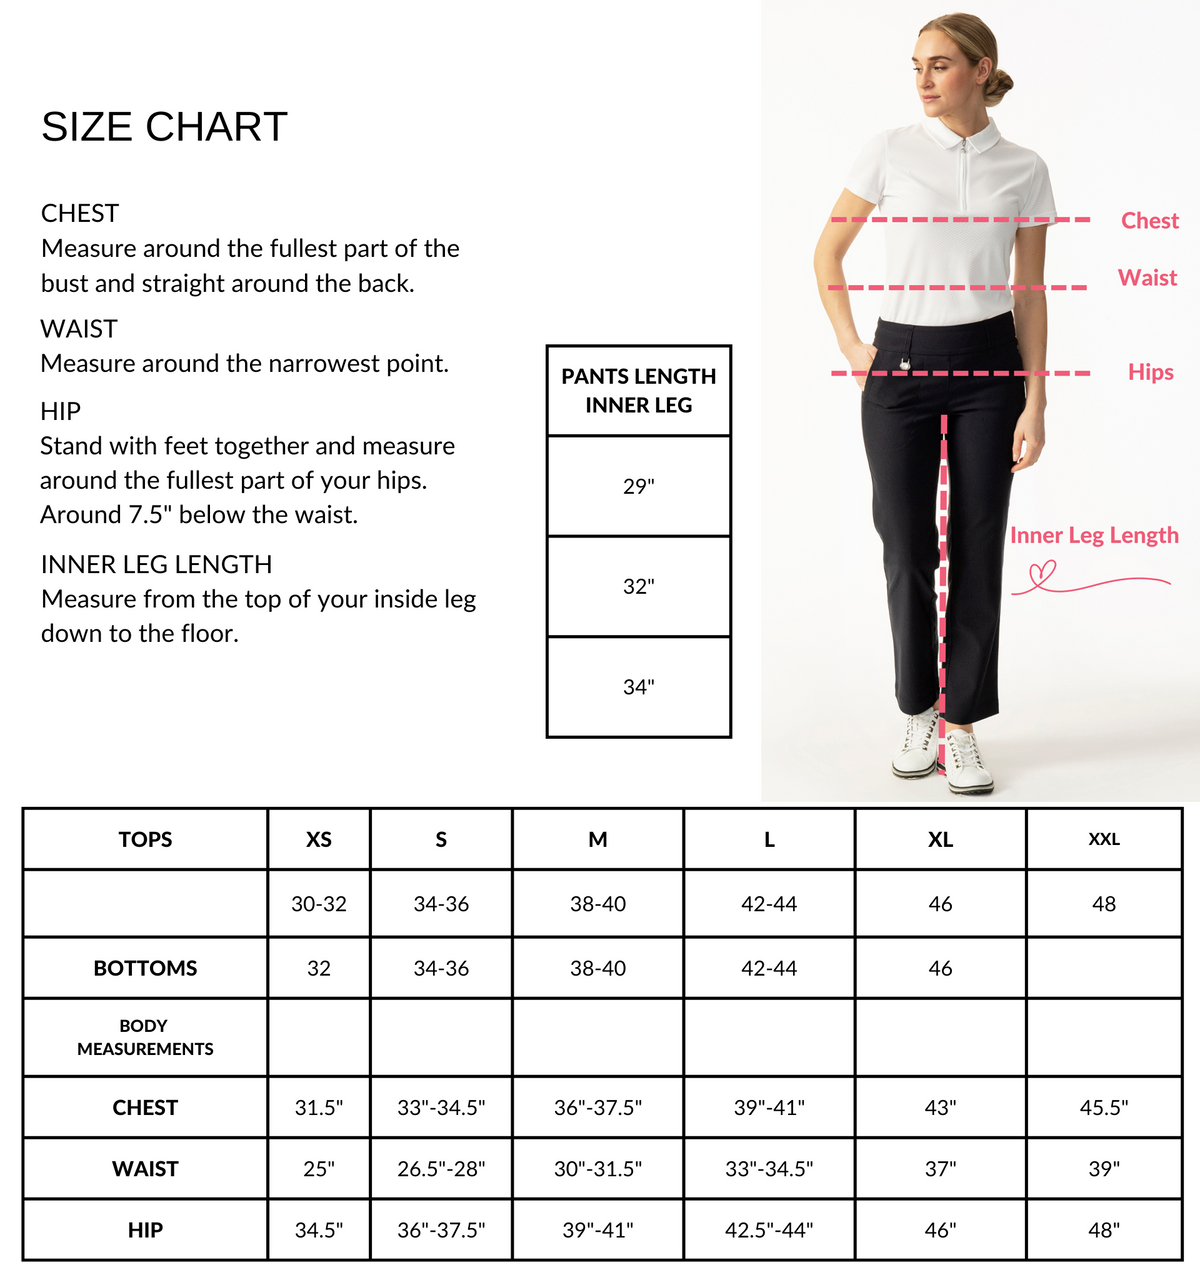 Daily Sports Magic High Water Women's Golf Pants - White - Fore Ladies -  Golf Dresses and Clothes, Tennis Skirts and Outfits, and Fashionable  Activewear